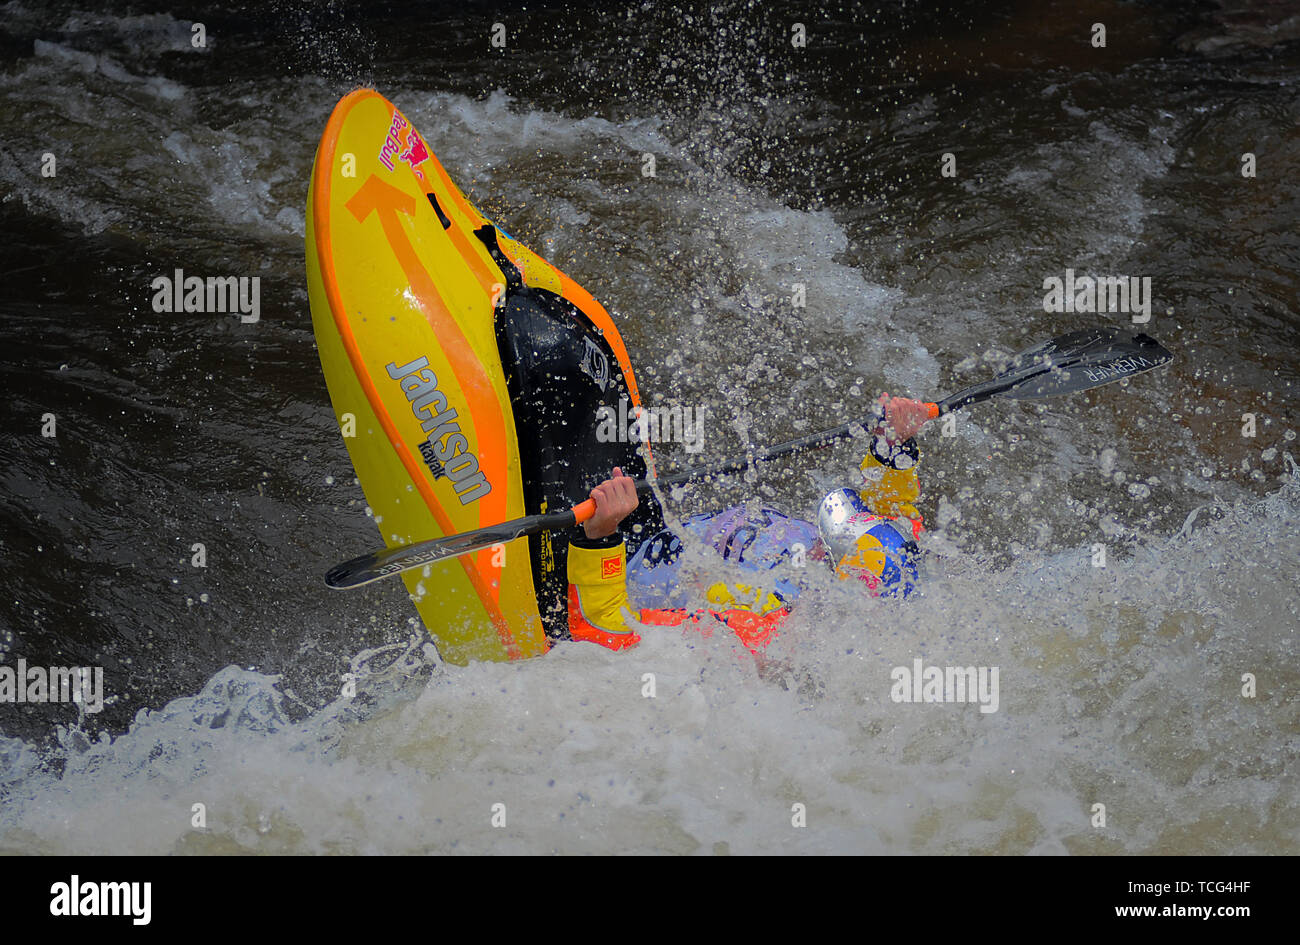 Colorado, USA. 07th June, 2019. Team Jackson kayaker, Dane Jackson, in  semi-final action during the GoPro Mountain Games freestyle kayak  competition. Adventure athletes from around the world gather in Vail,  Colorado each